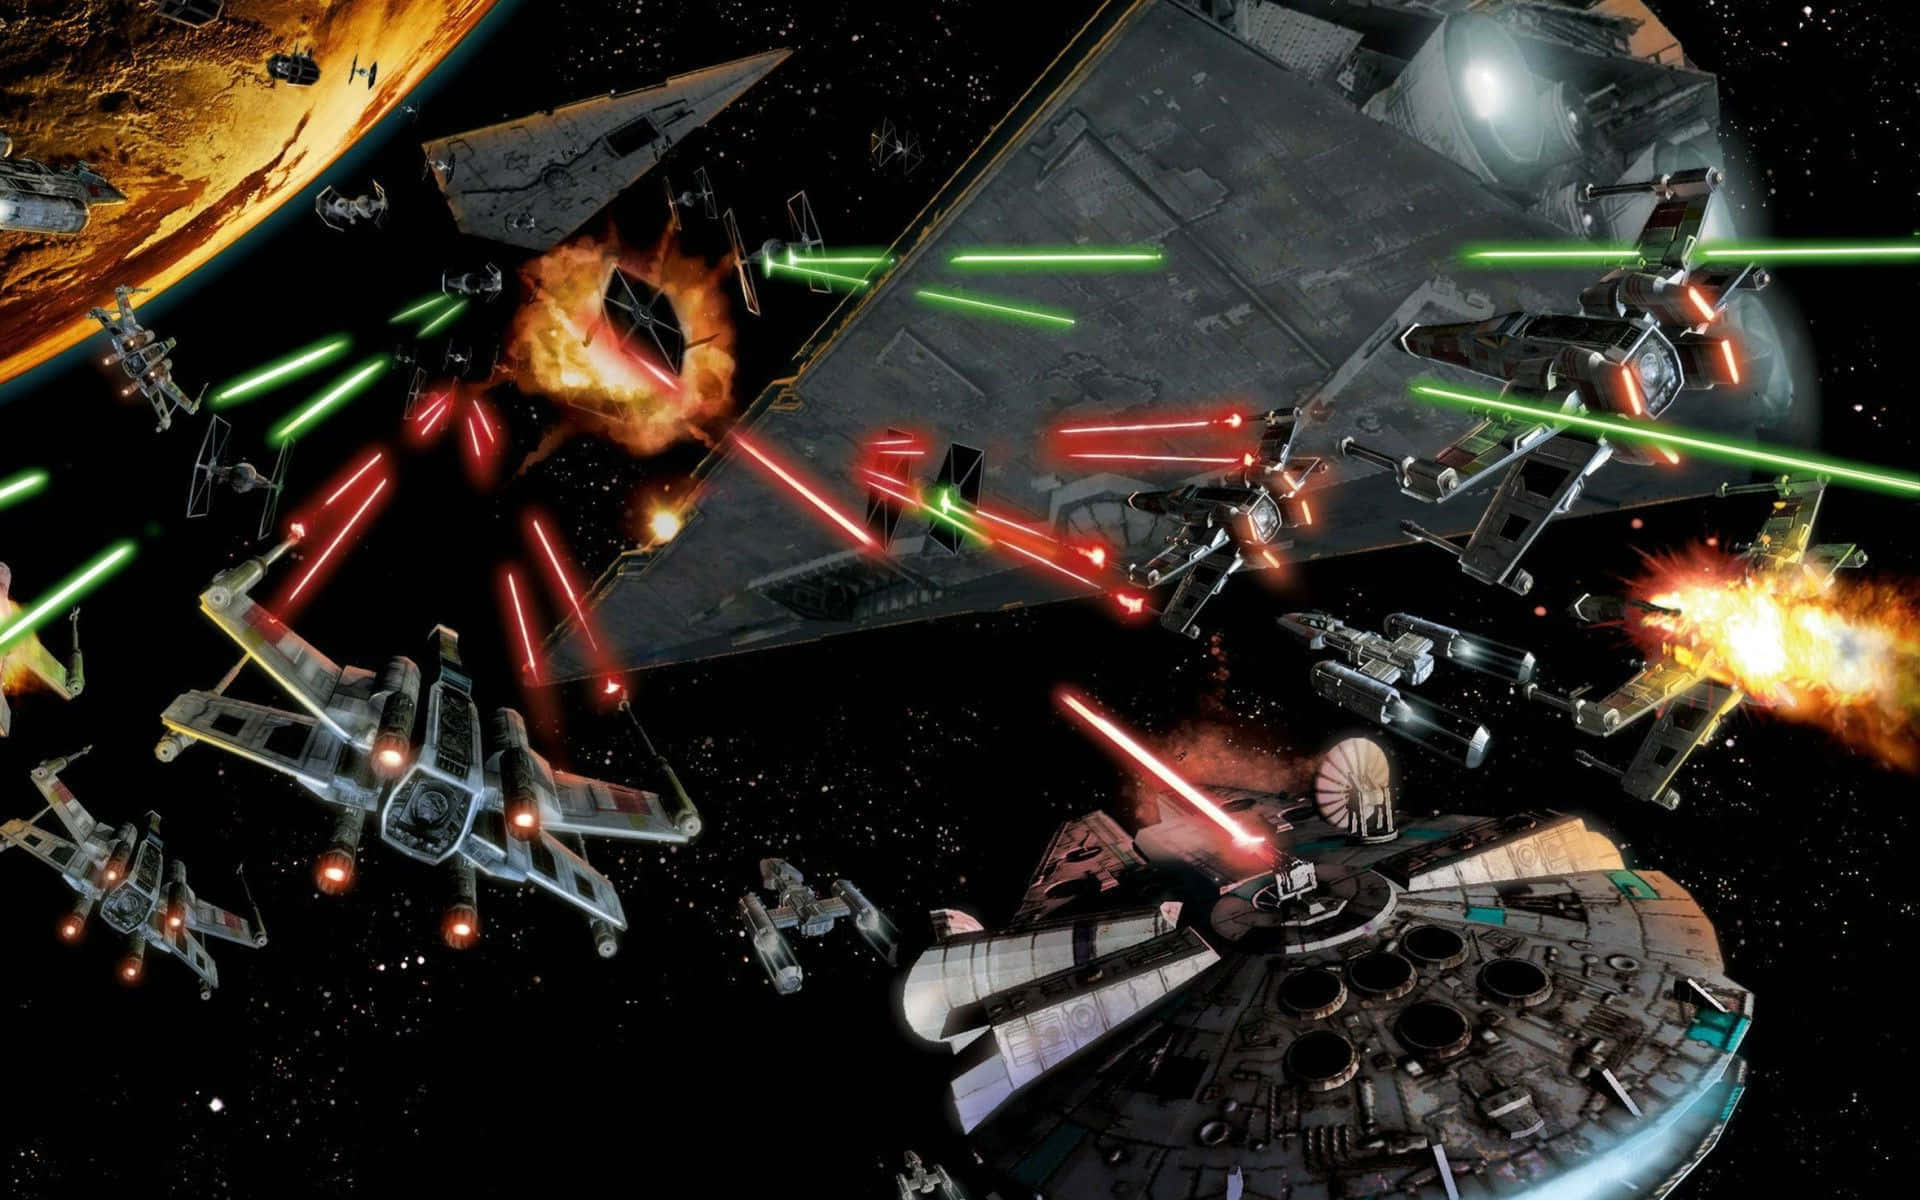 Escape the Imperial Fleet at Light Speed Aboard the Millenium Falcon Wallpaper